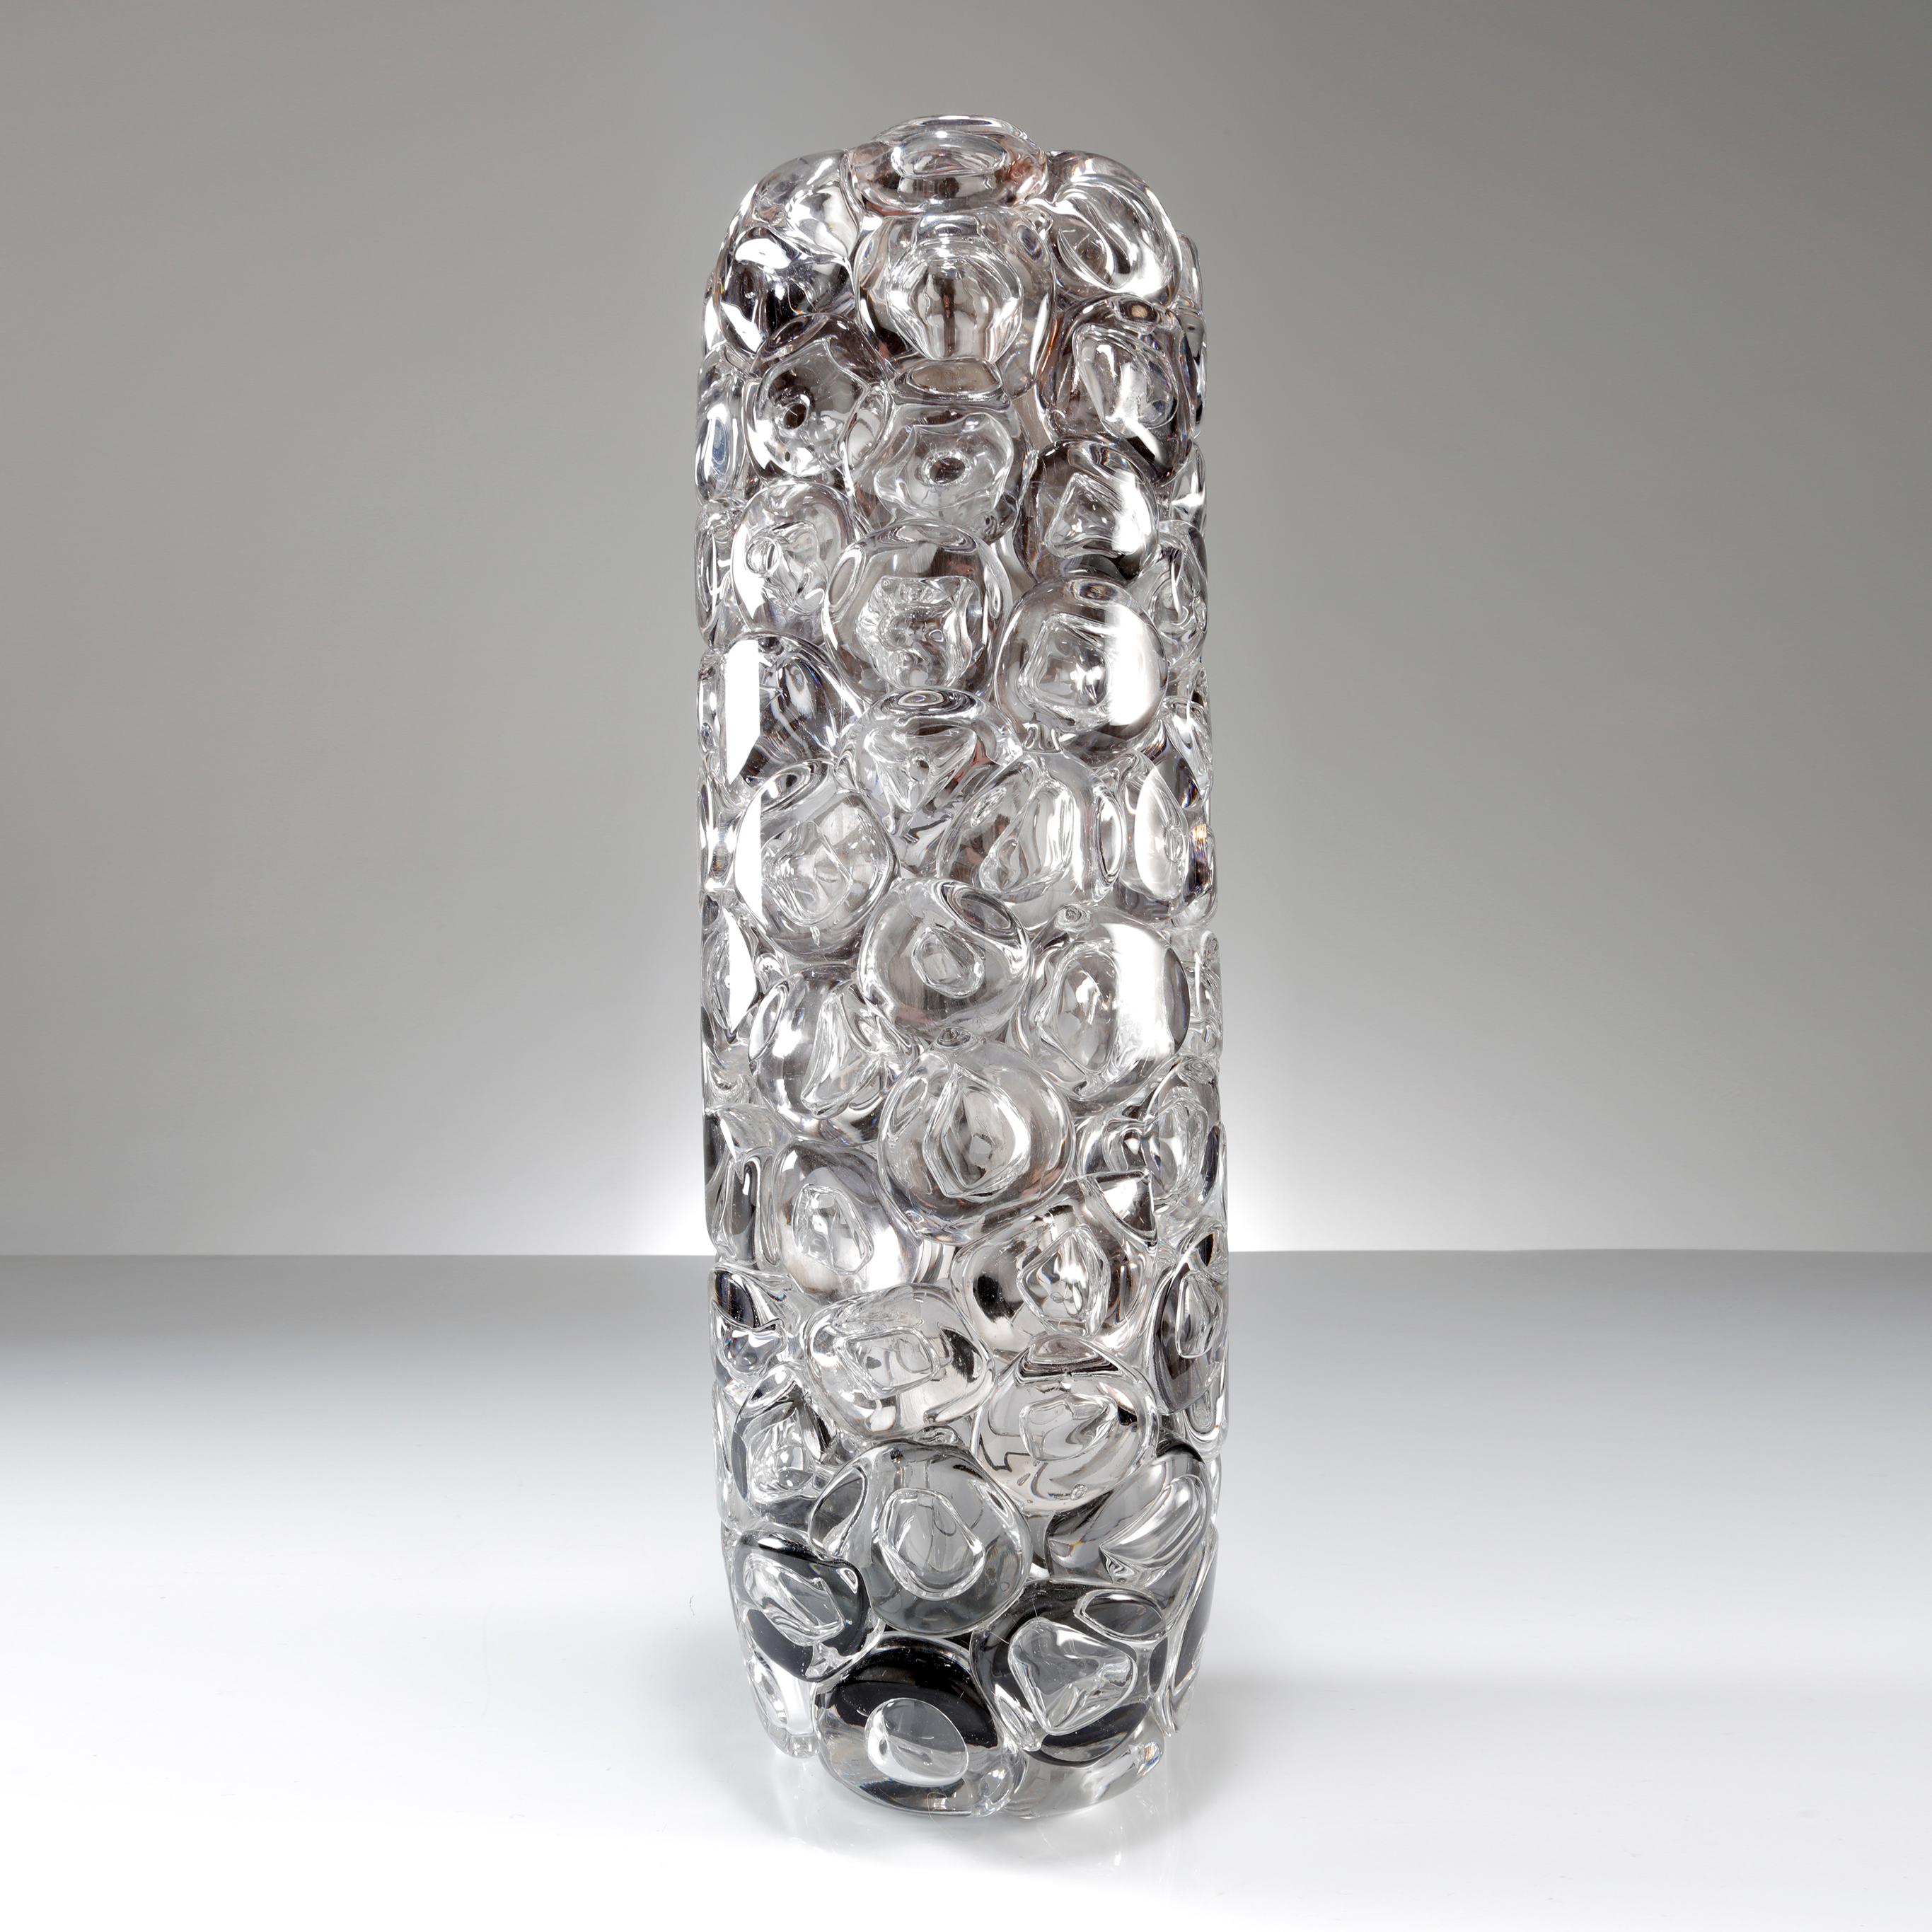 Hand-Crafted Bubblewrap in Monochrome II, a Silver and Clear Glass Vase by Allister Malcolm